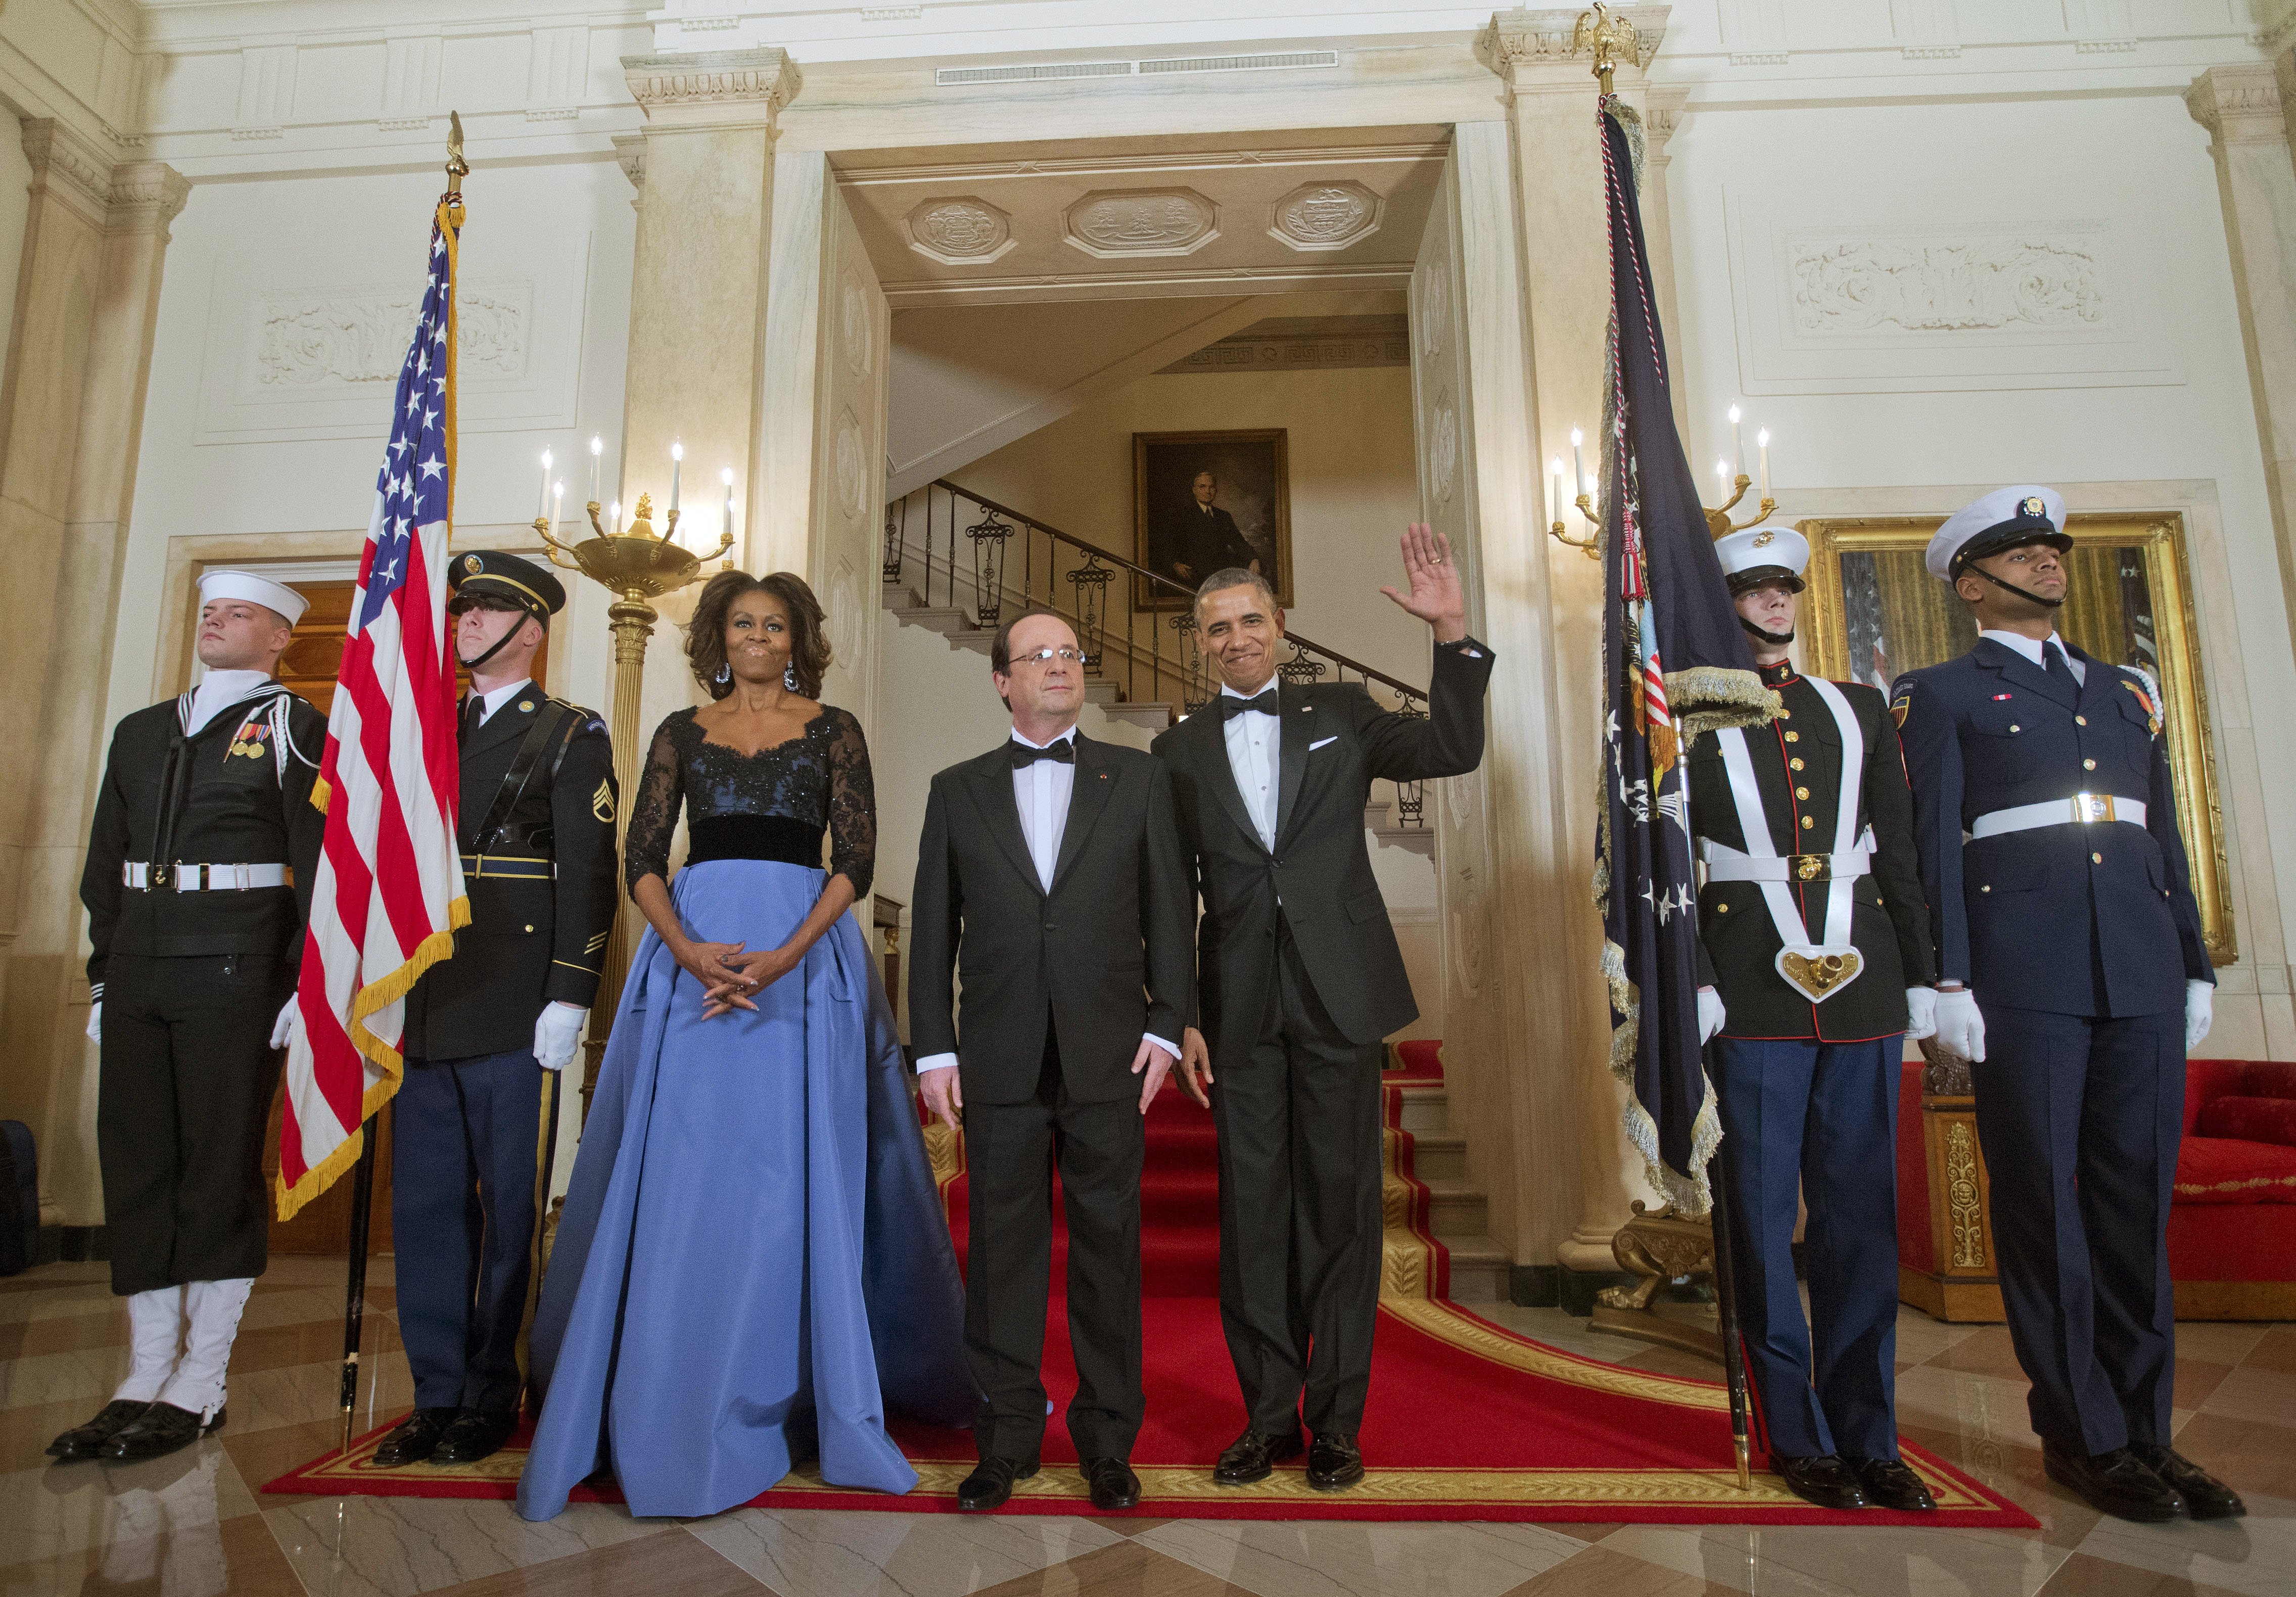 First Lady Michelle Obama and President Barack Obama with French President Francois Hollande, center, pose at the Grand Staircase as they arrive for a State Dinner, Tuesday, Feb. 11, 2014, at the White House in Washington.